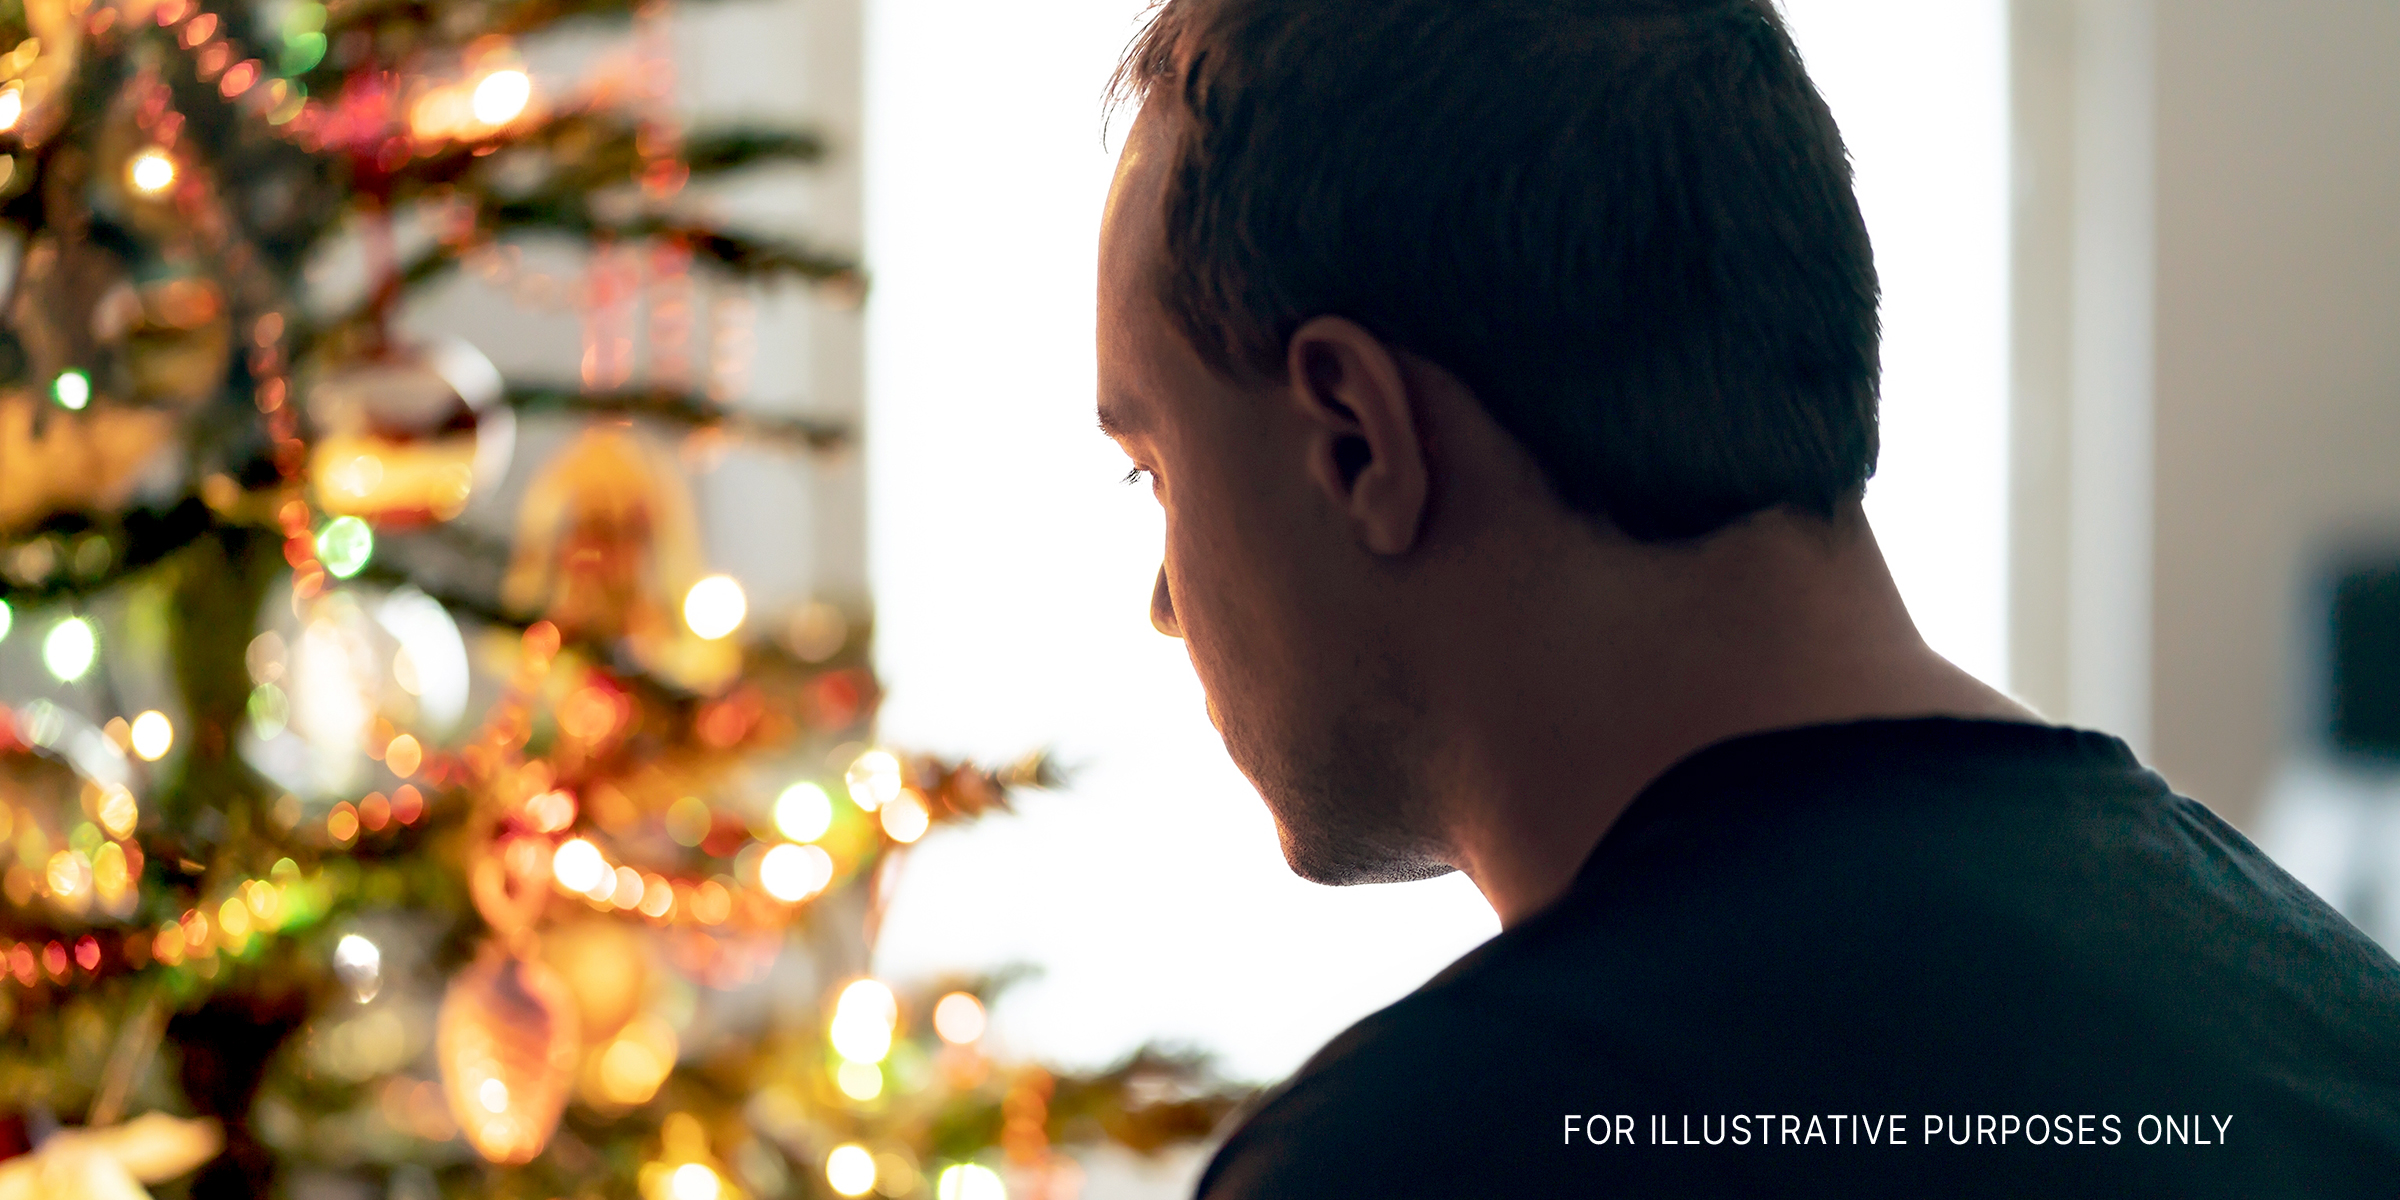 Man staring at a Christmas tree | Source: Shutterstock